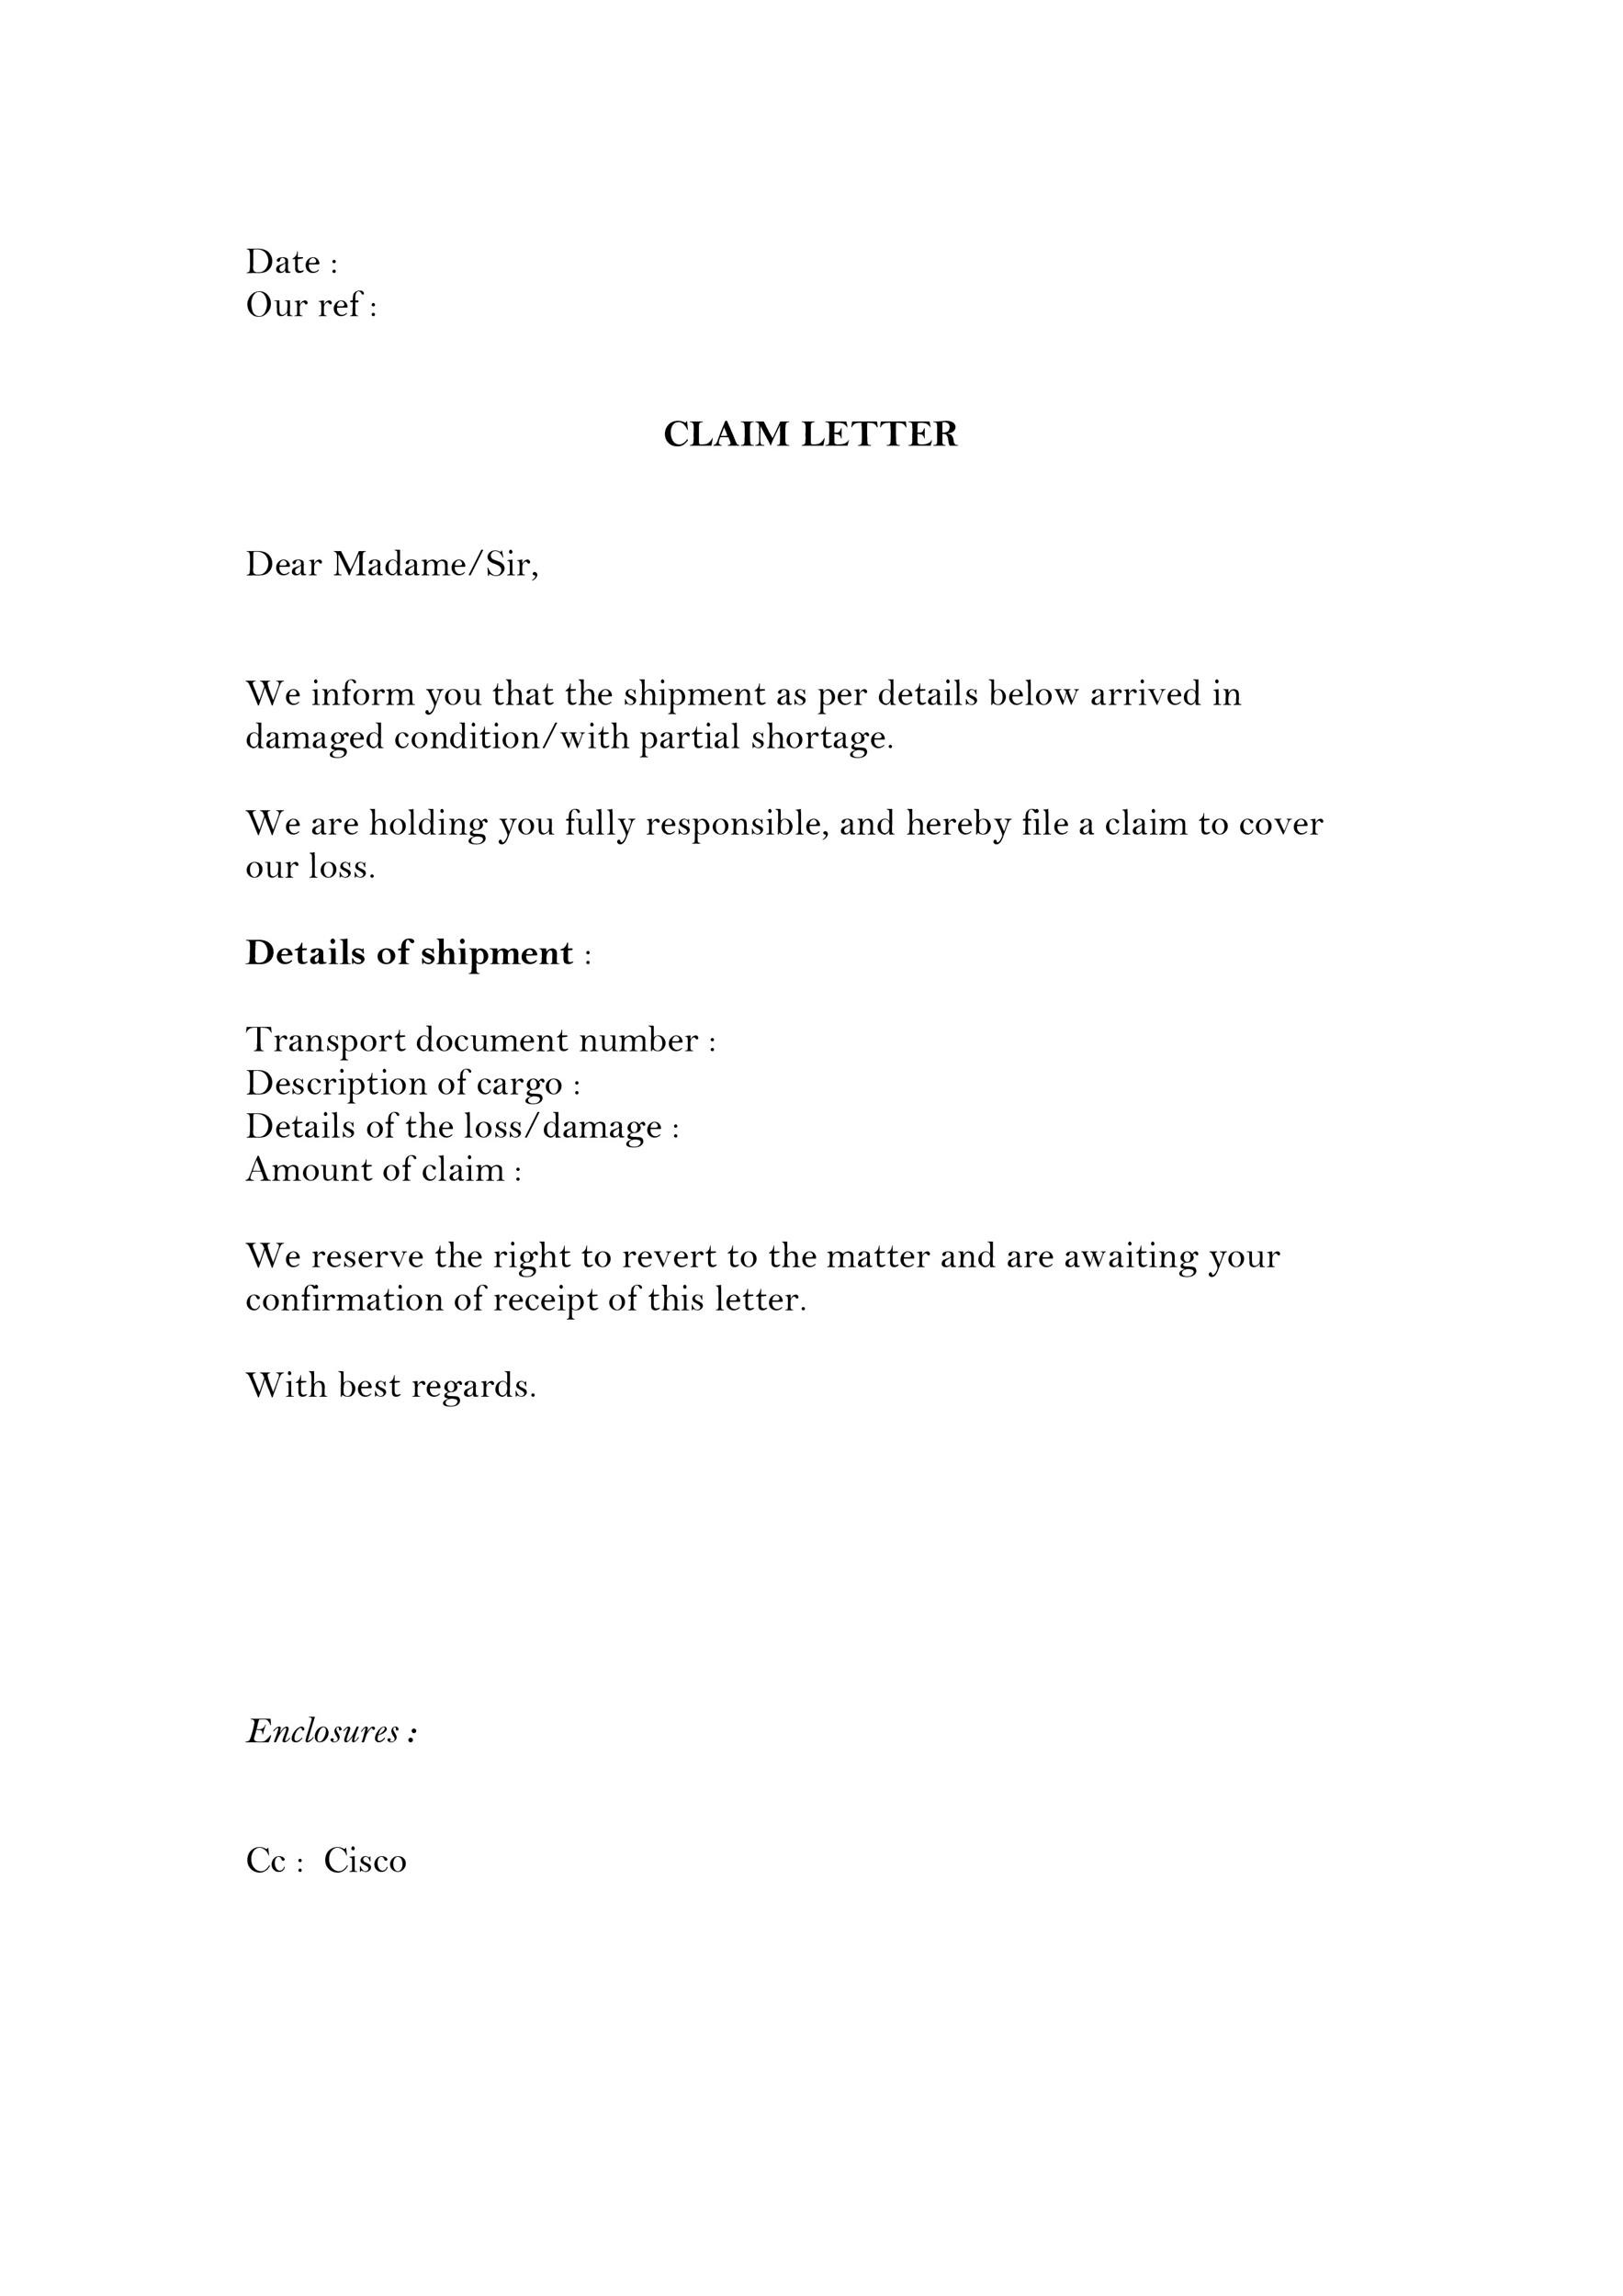 49-free-claim-letter-examples-how-to-write-a-claim-letter